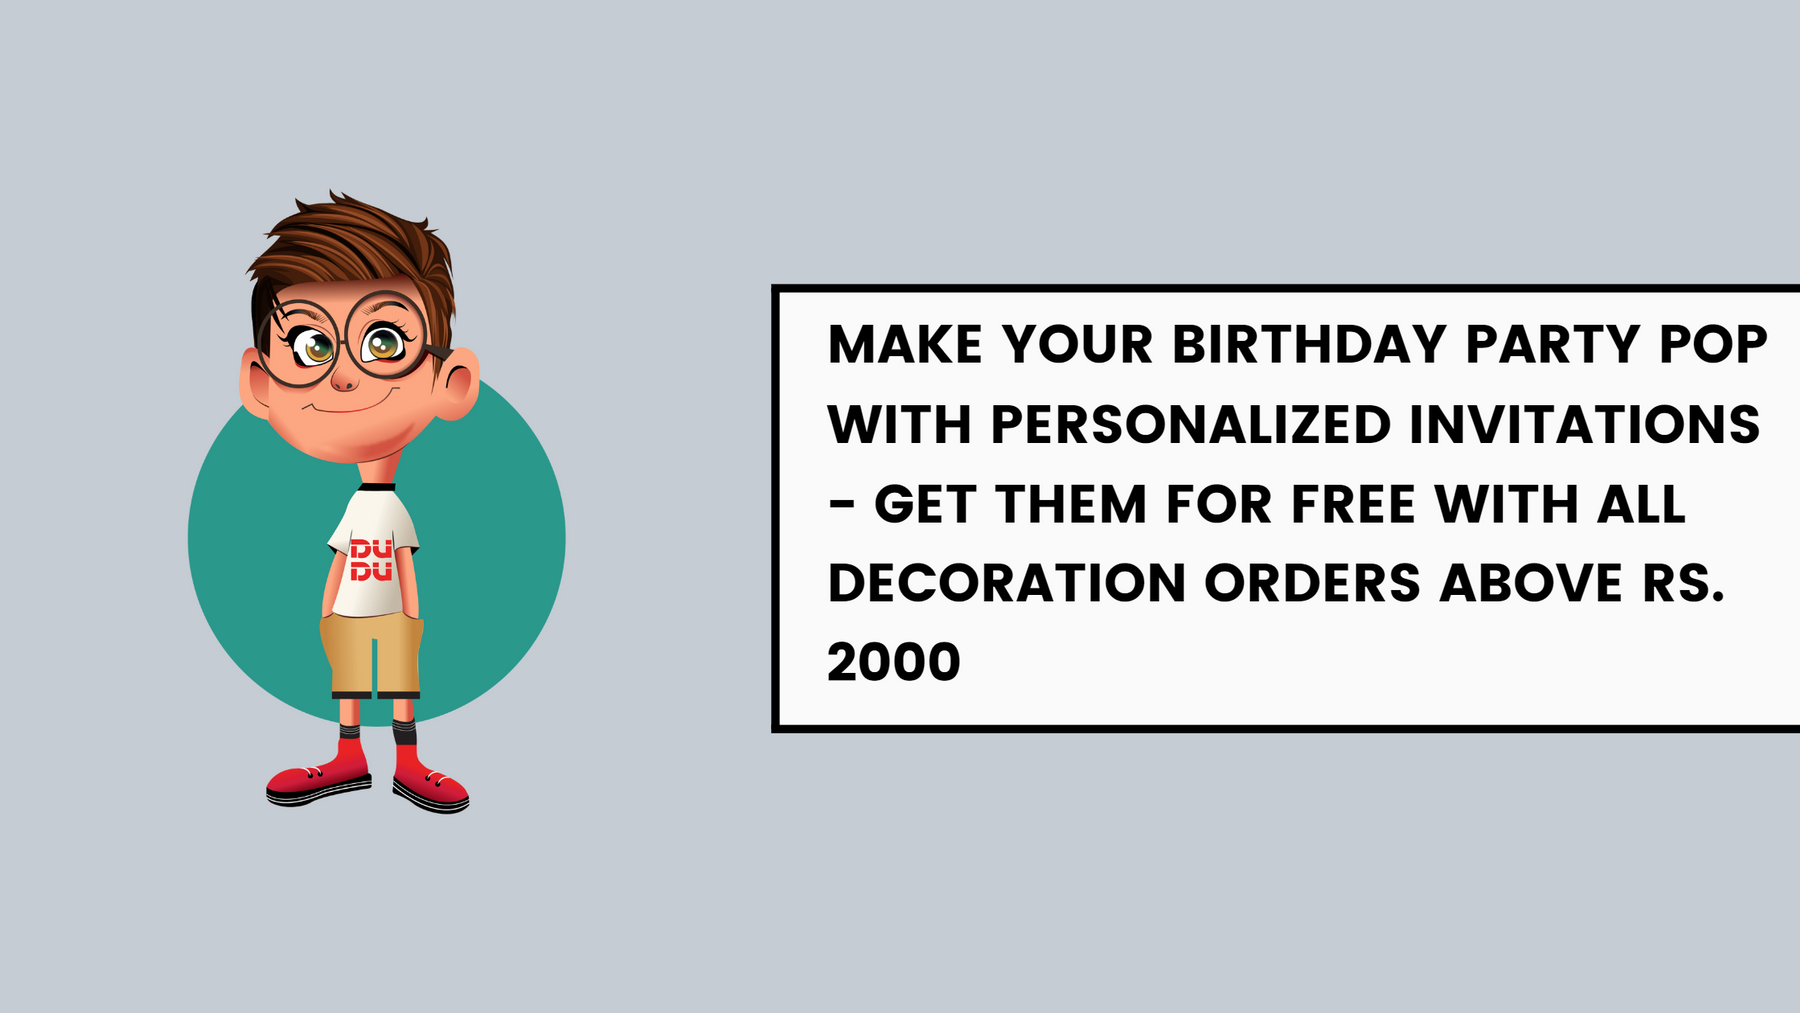 Make Your Birthday Party Pop With Personalized Invitations - Get Them For Free